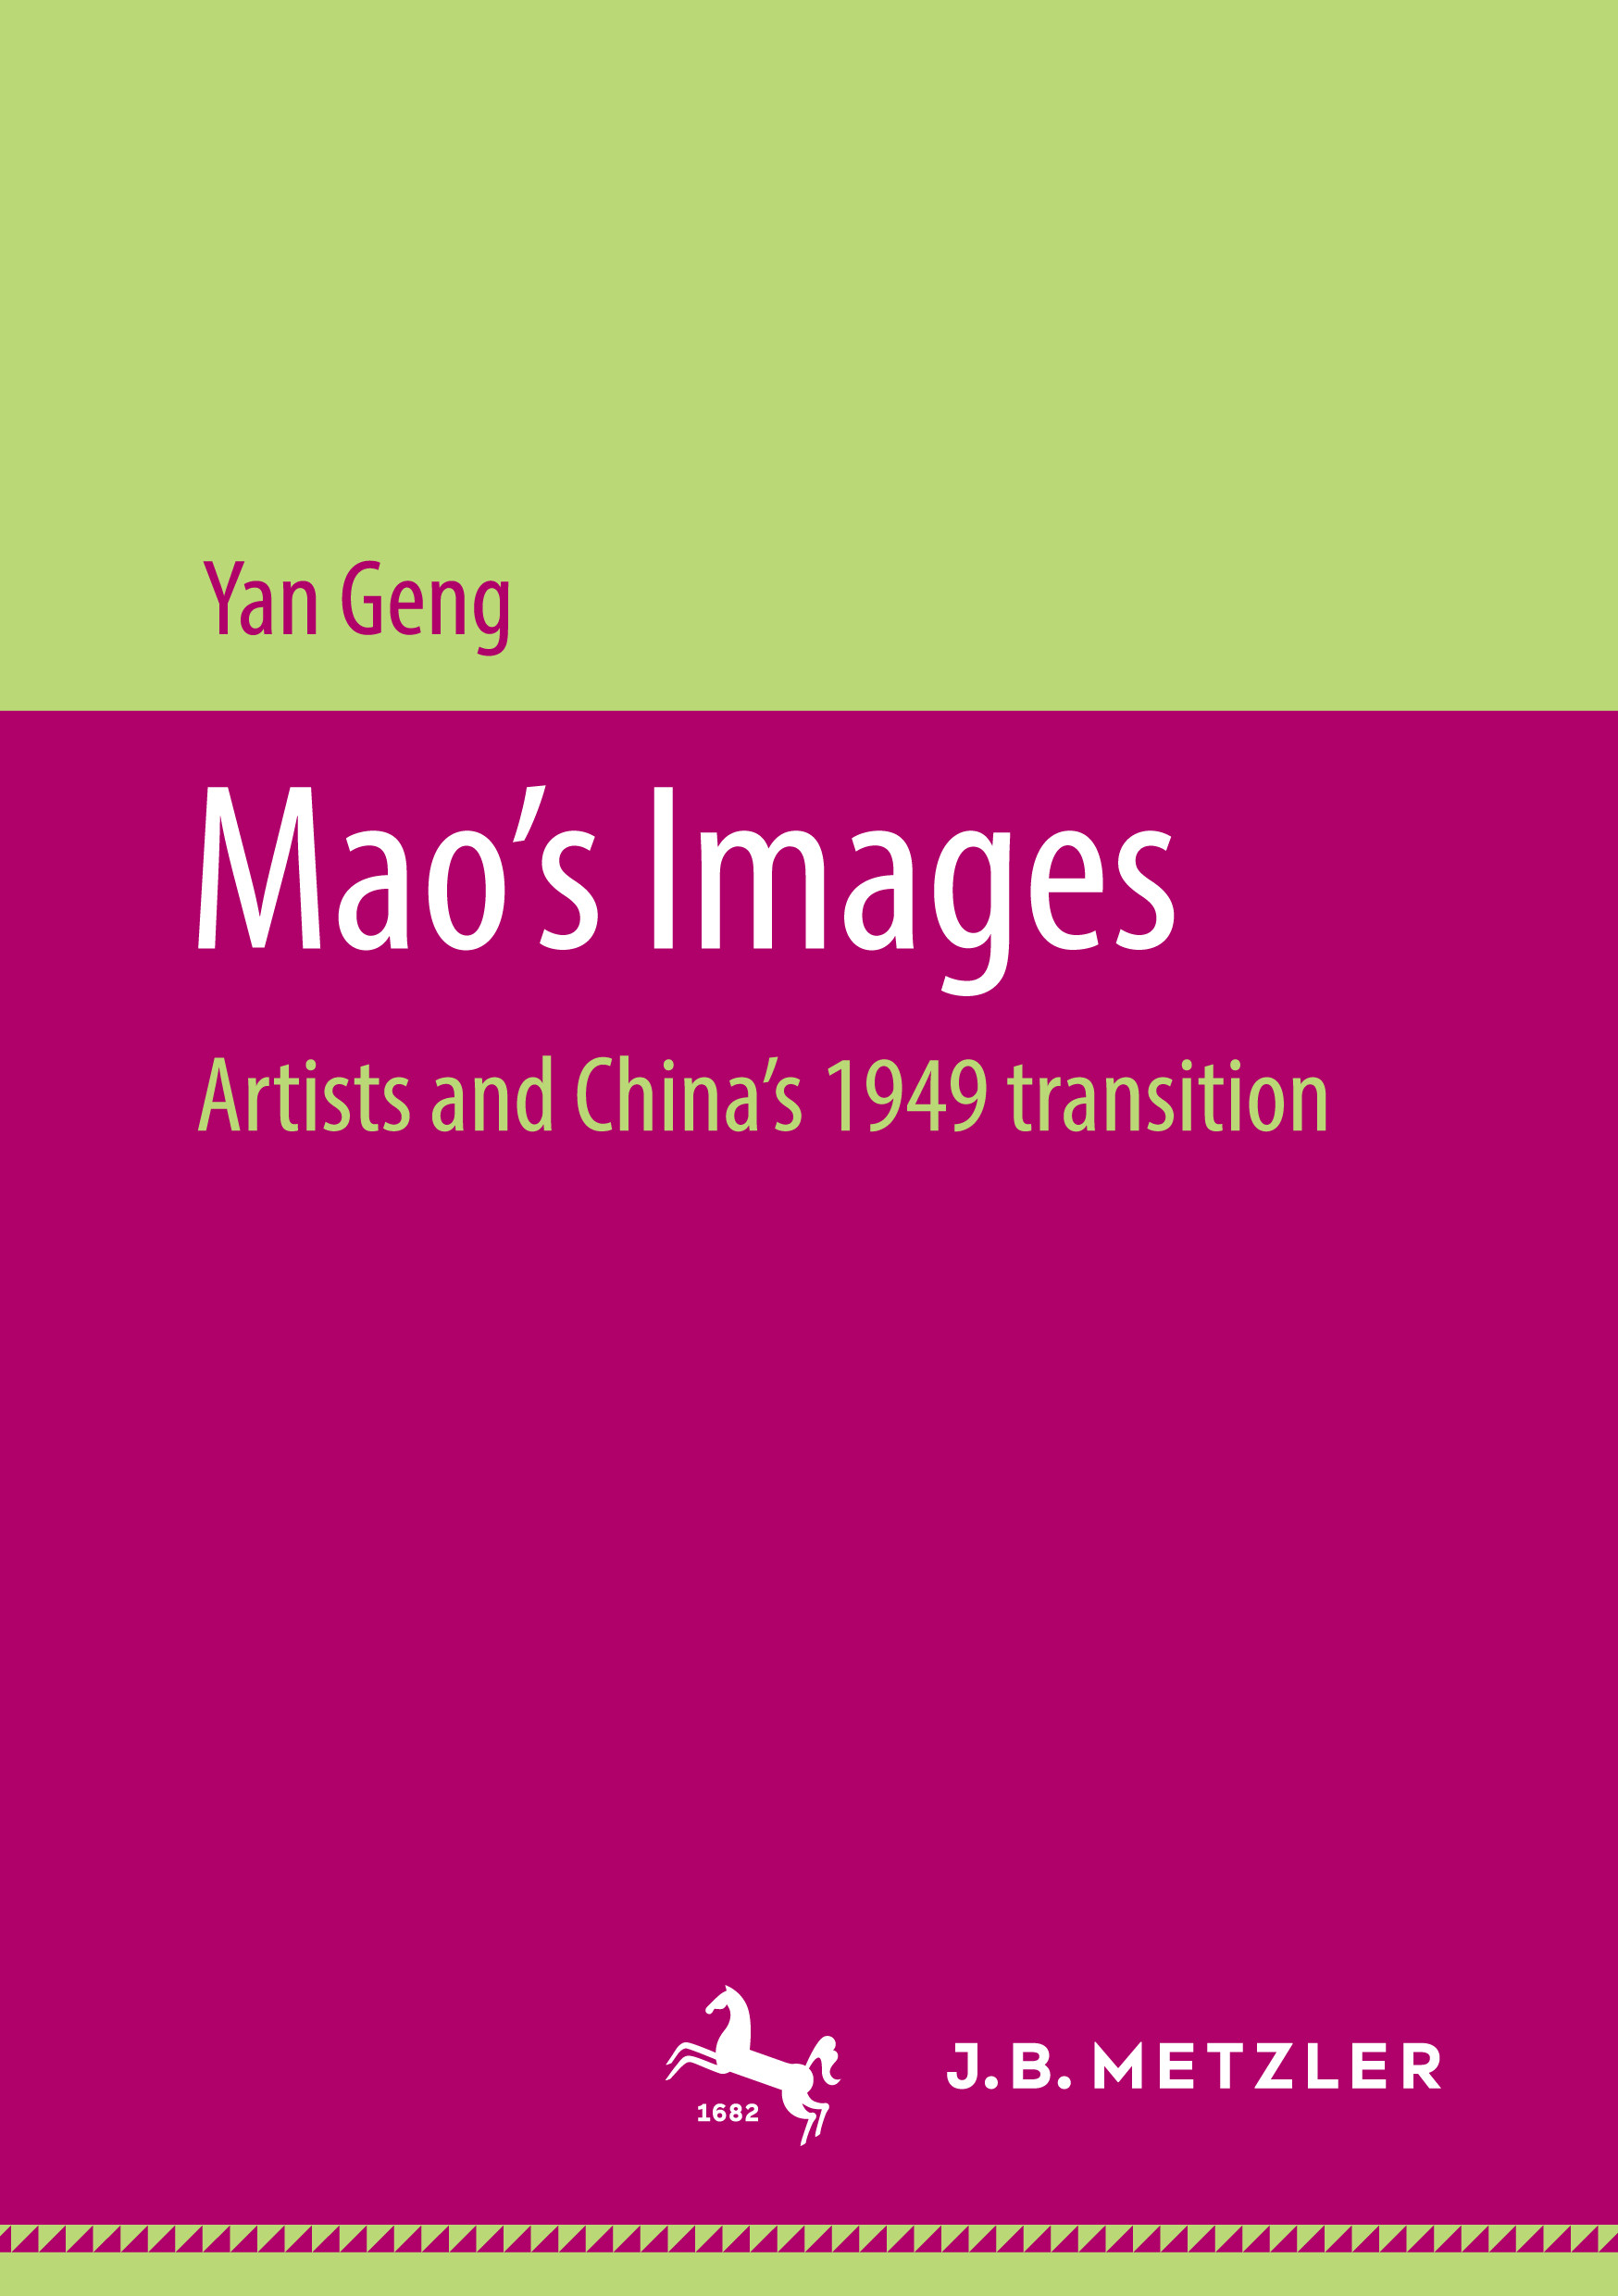 Yan Geng: Mao’s Images. Artists and China’s 1949 transition. J. B. Metzler